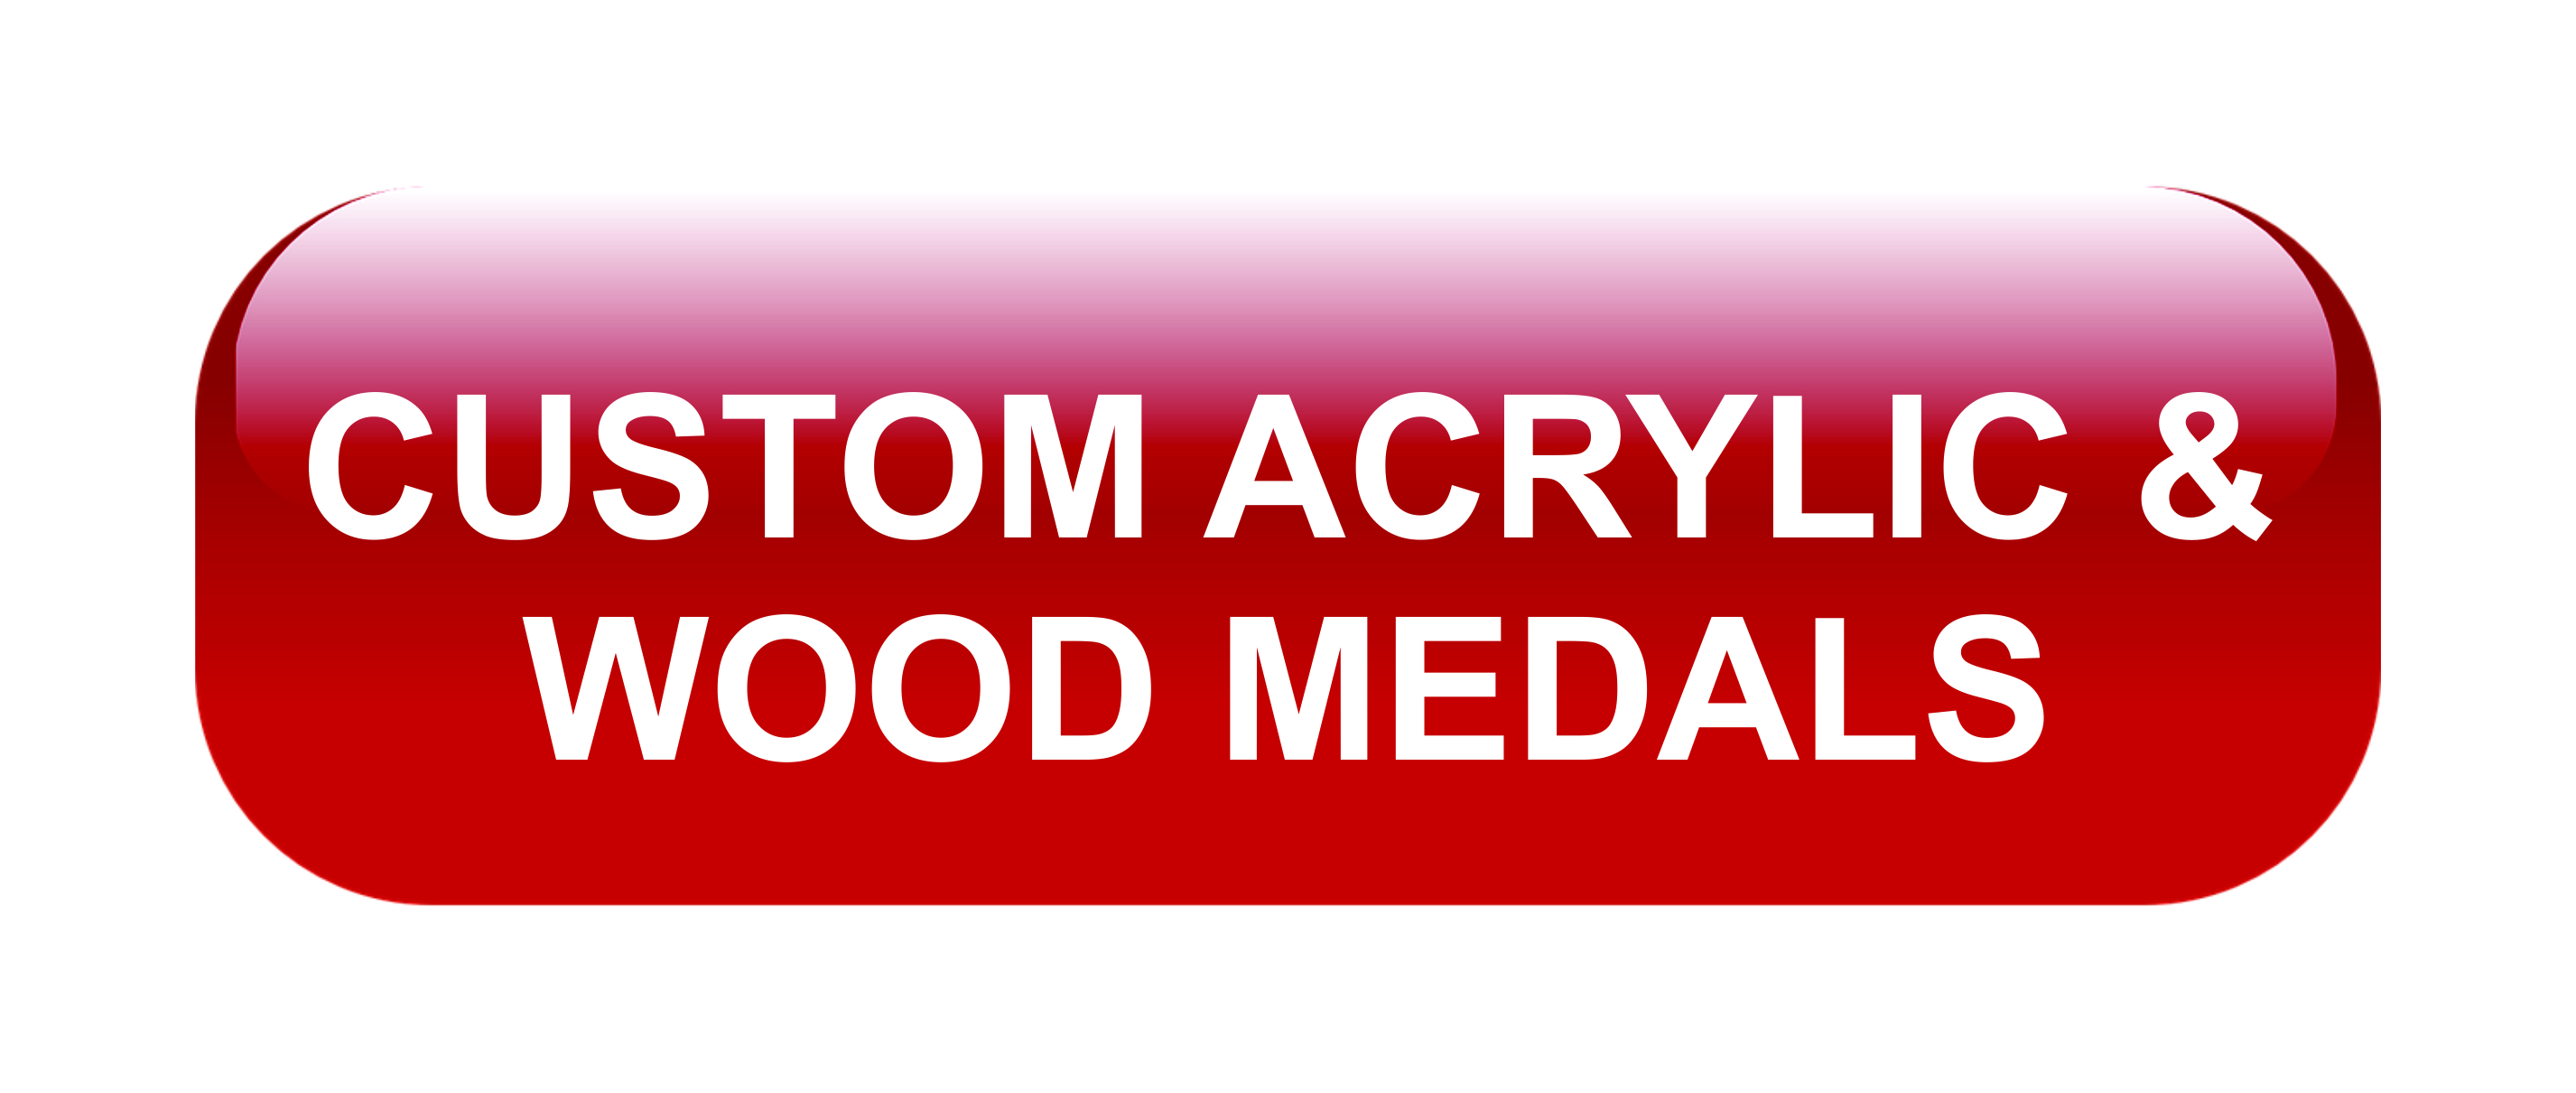 Photo gallery of acrylic and wood award medals